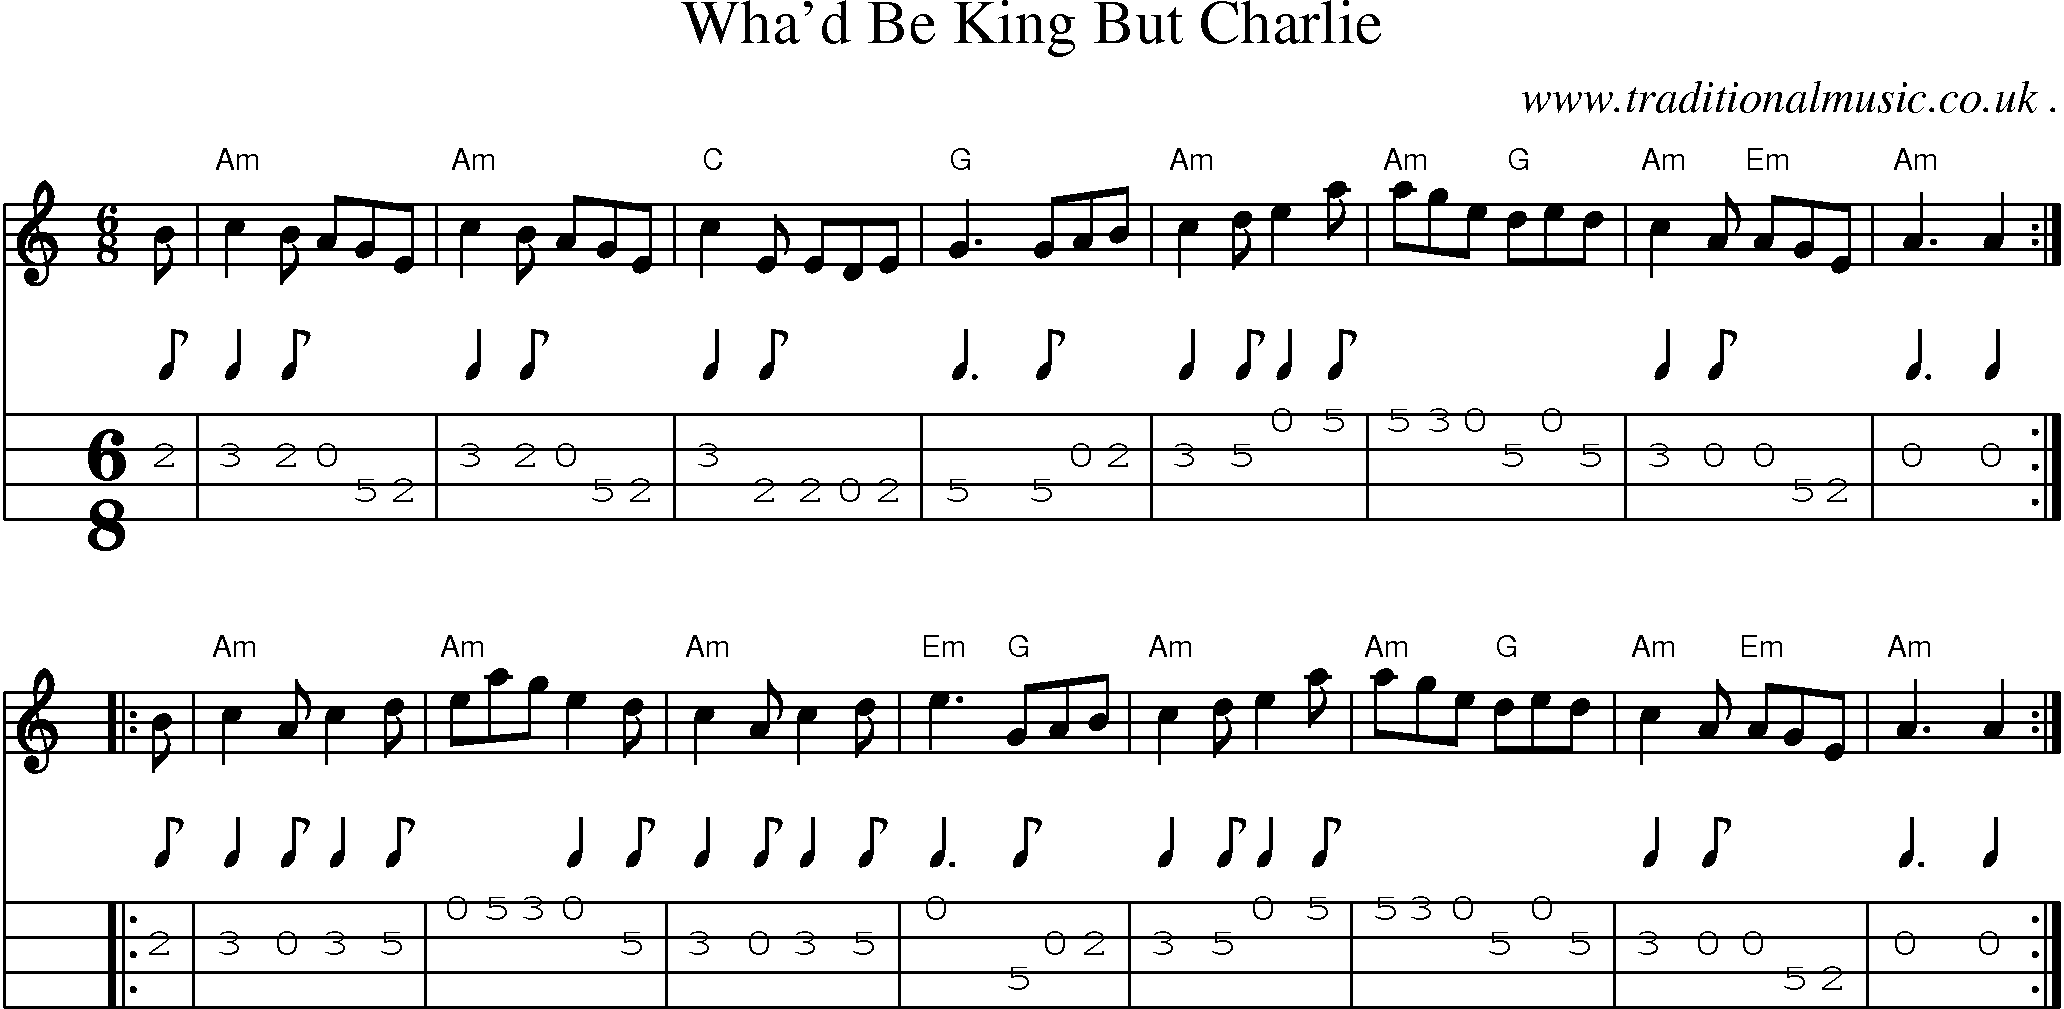 Sheet-music  score, Chords and Mandolin Tabs for Whad Be King But Charlie